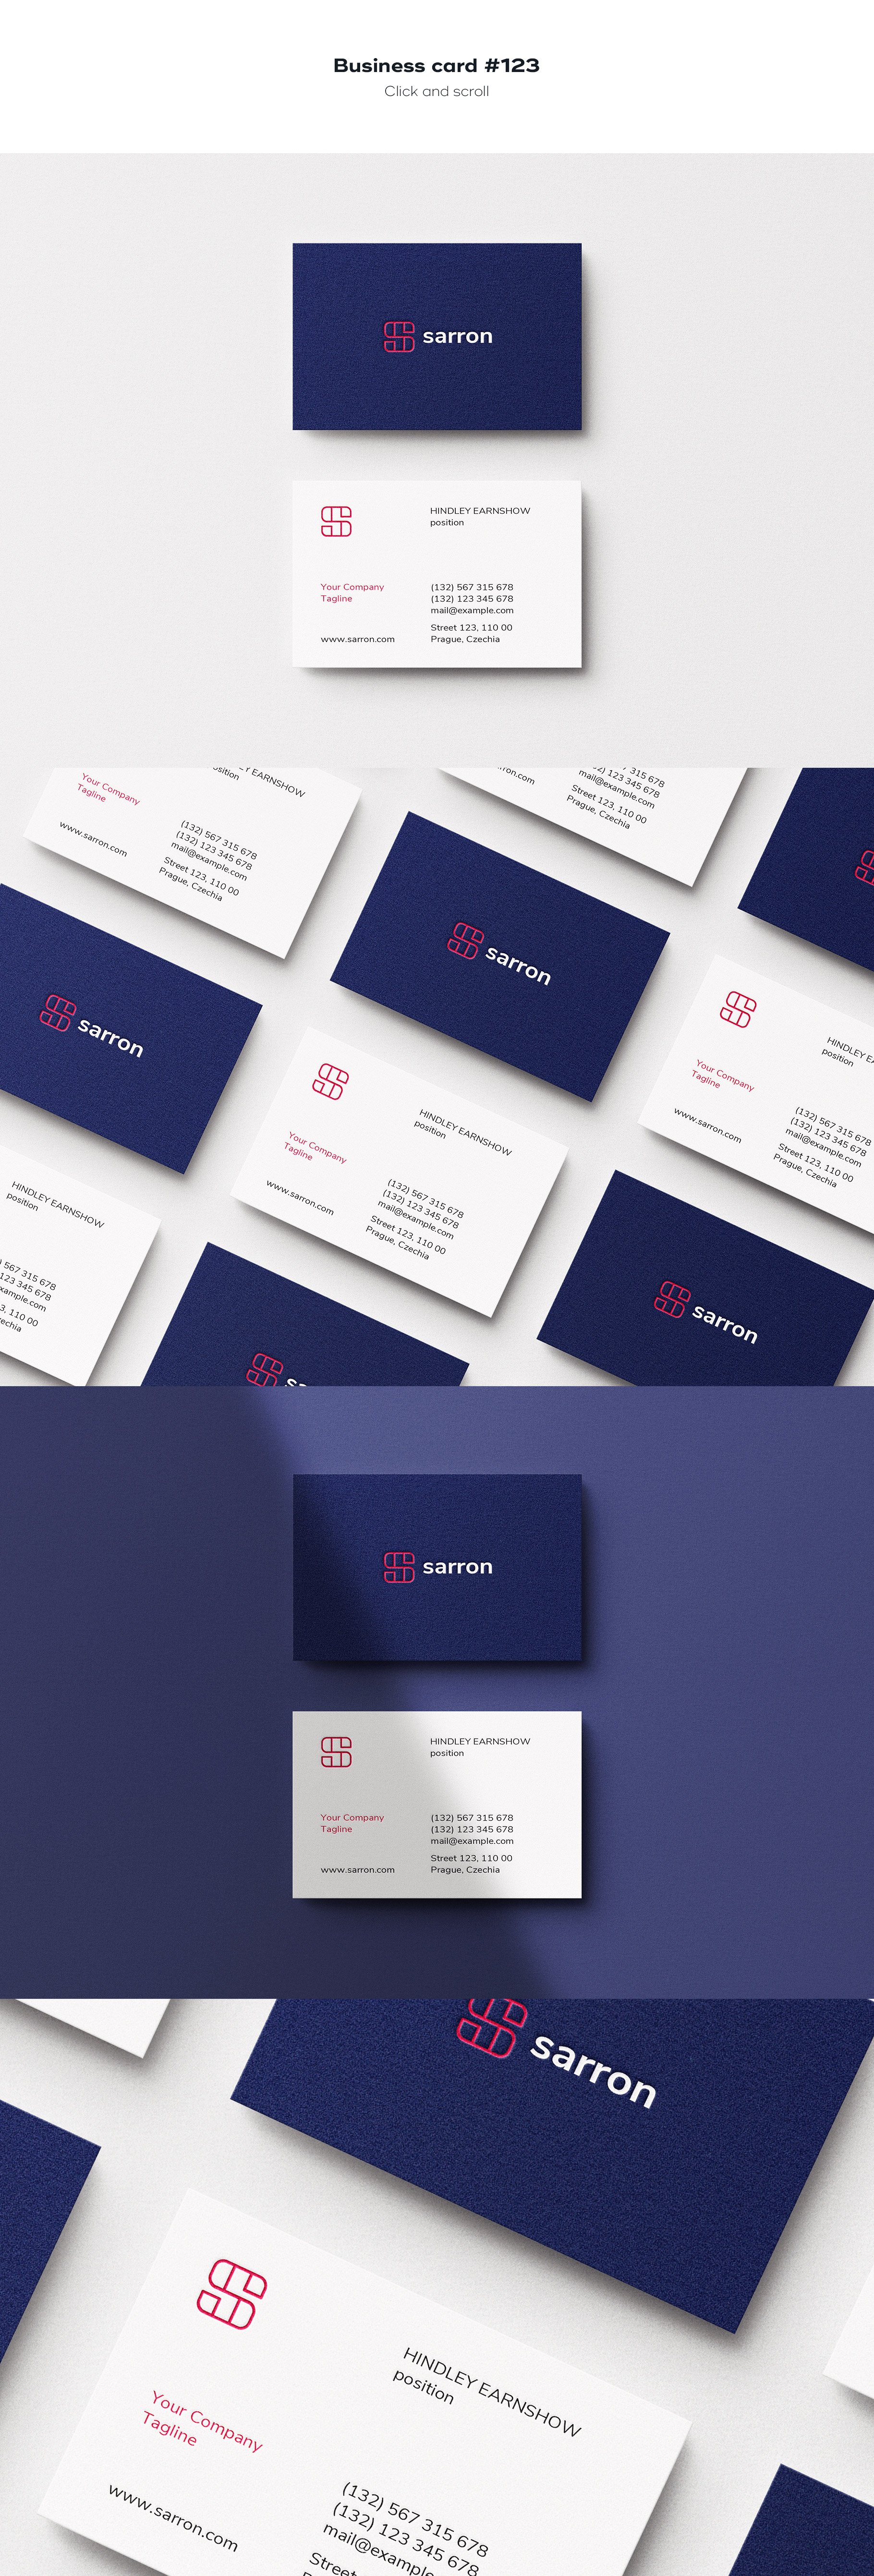 business card 123 295